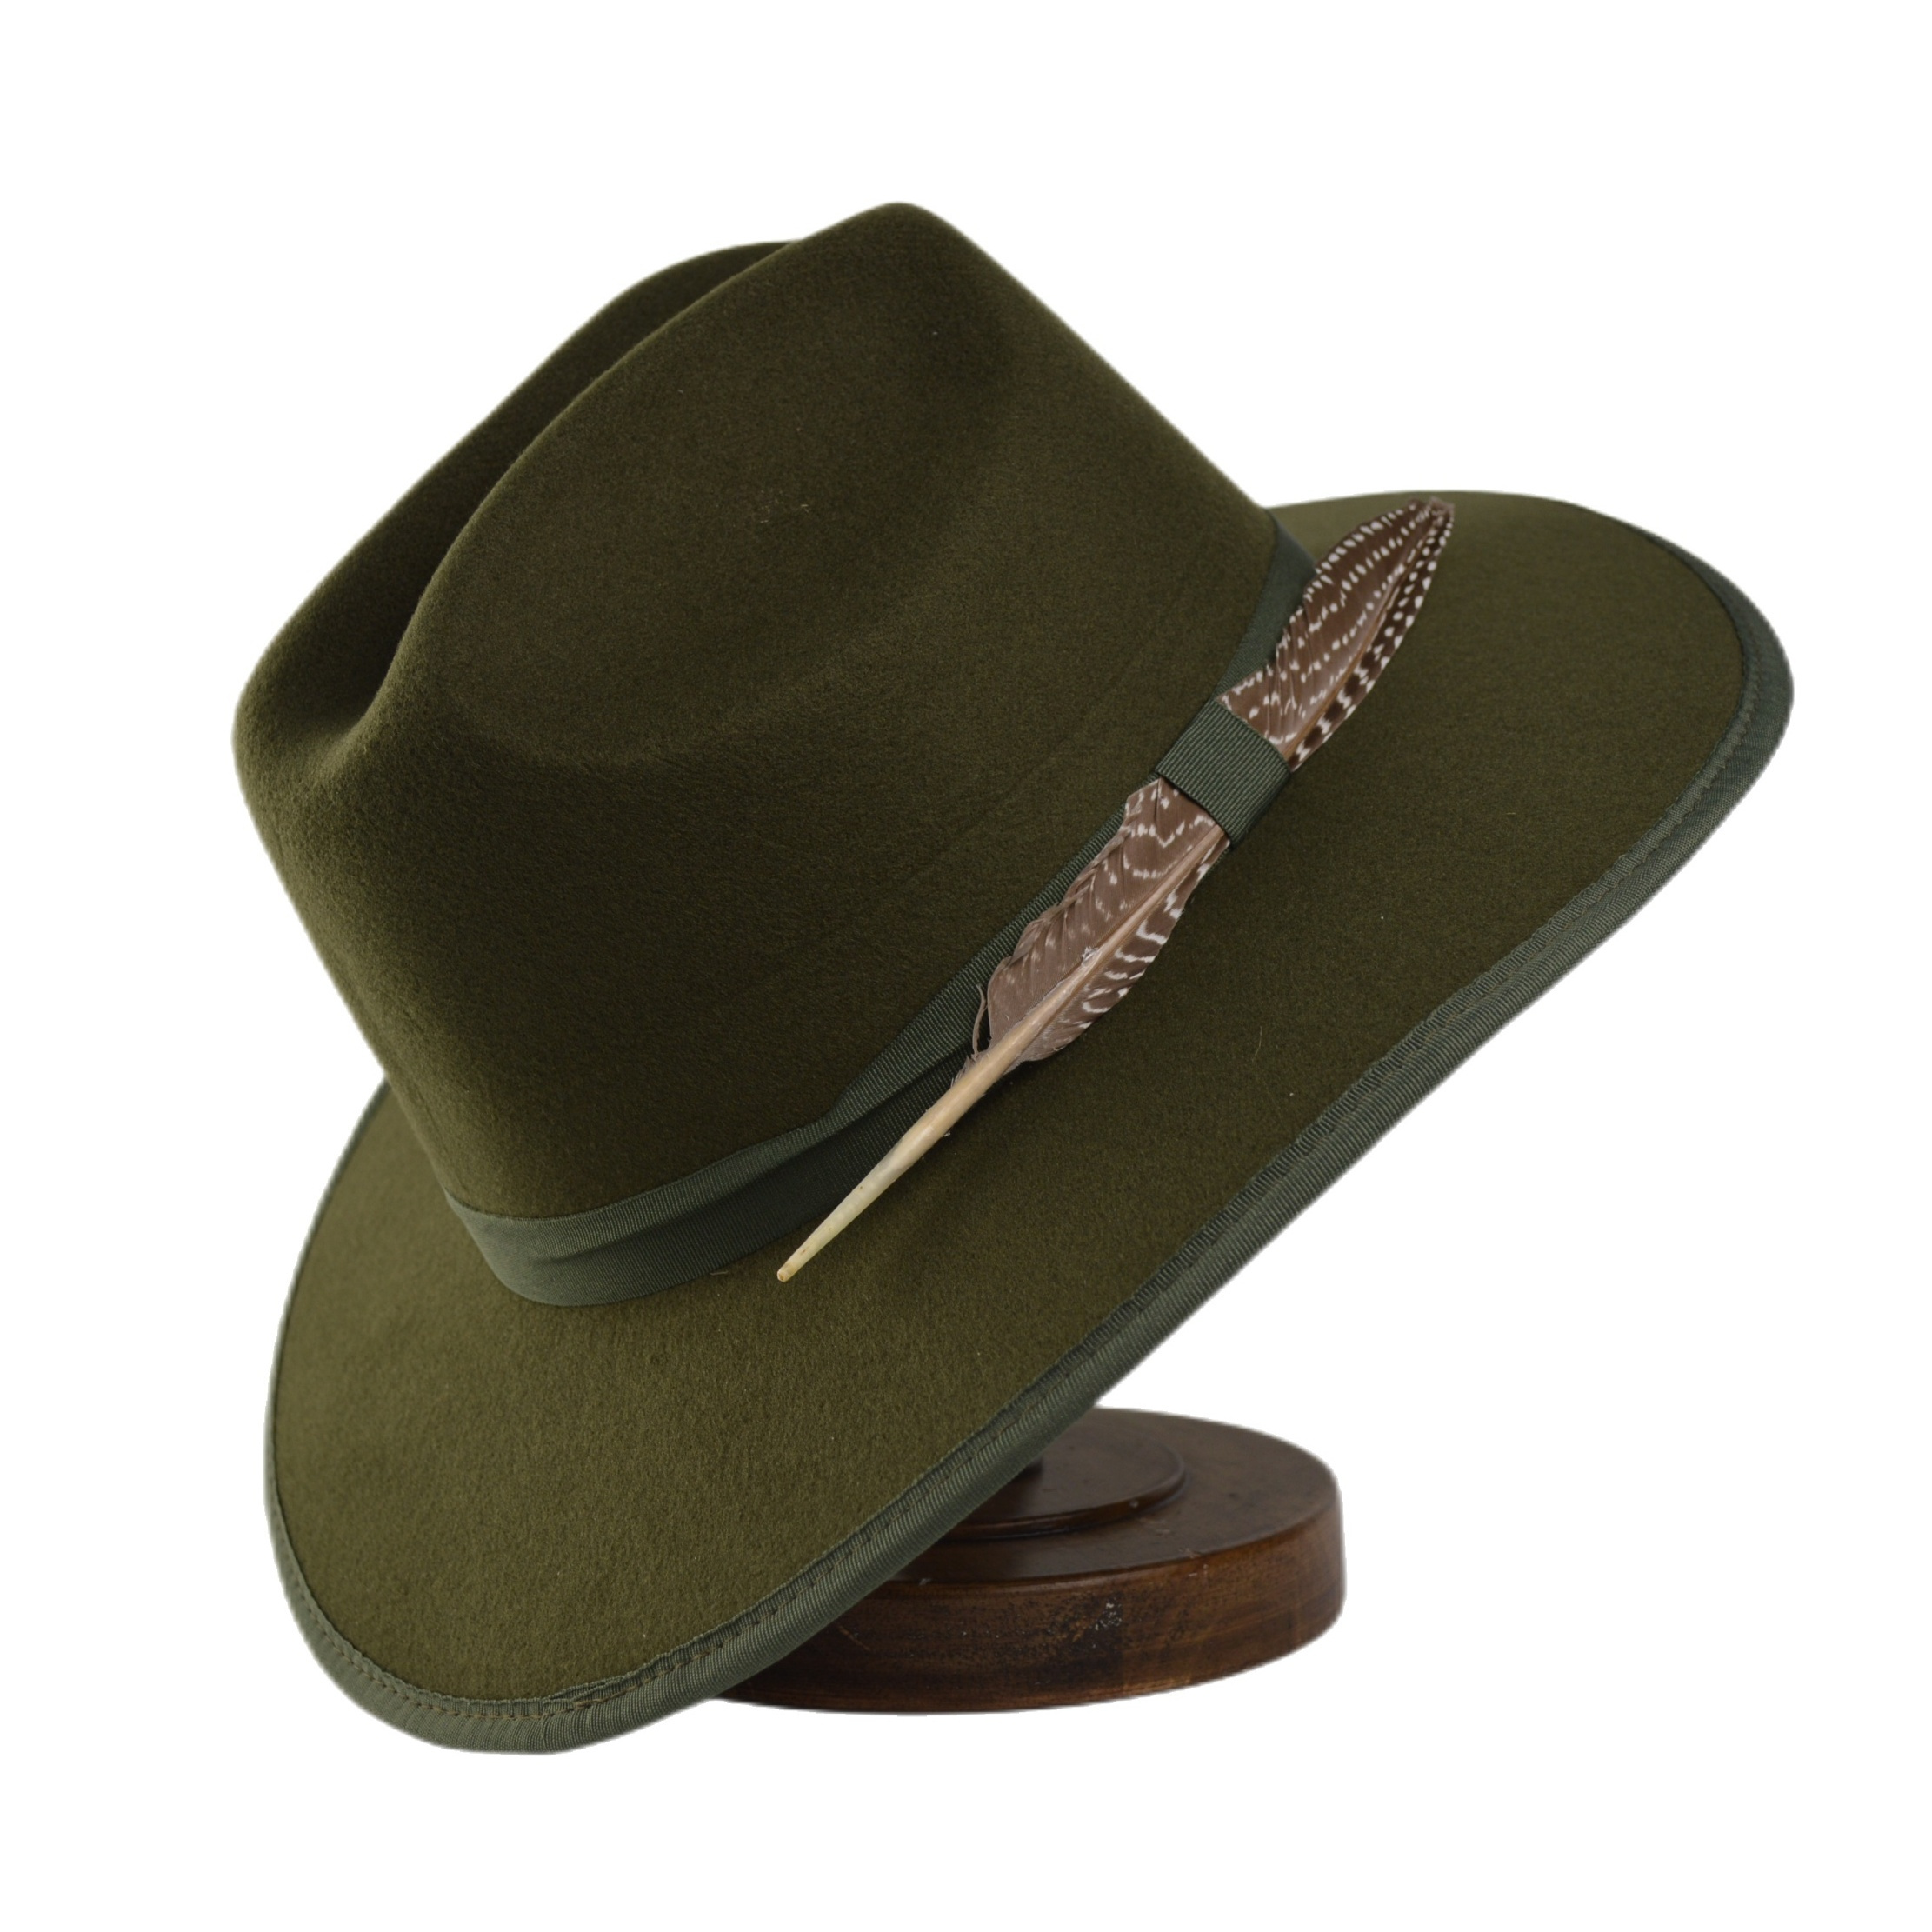 Fashion Woolen Wide Brim Felt Hat Green Classic Fedora Hat For Men & Women Dress Hats With Band And Feathers , Ideal choice for Gifts